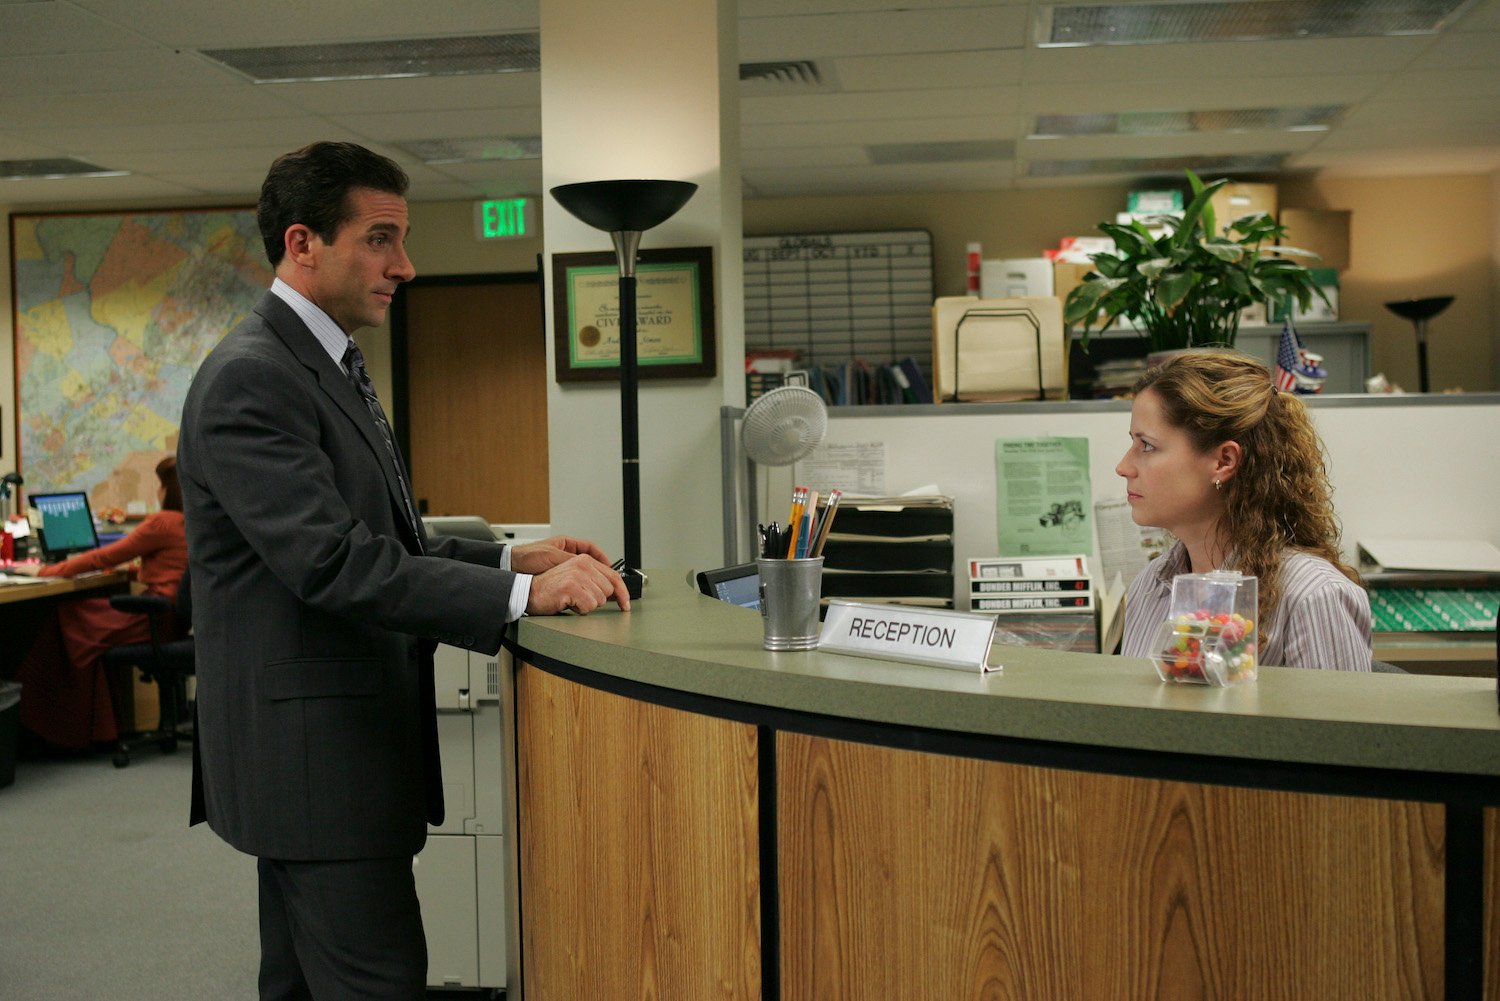 'The Office': Steve Carell stands at the reception desk as Michael Scott with Jenna Fischer as Pam Beesly 